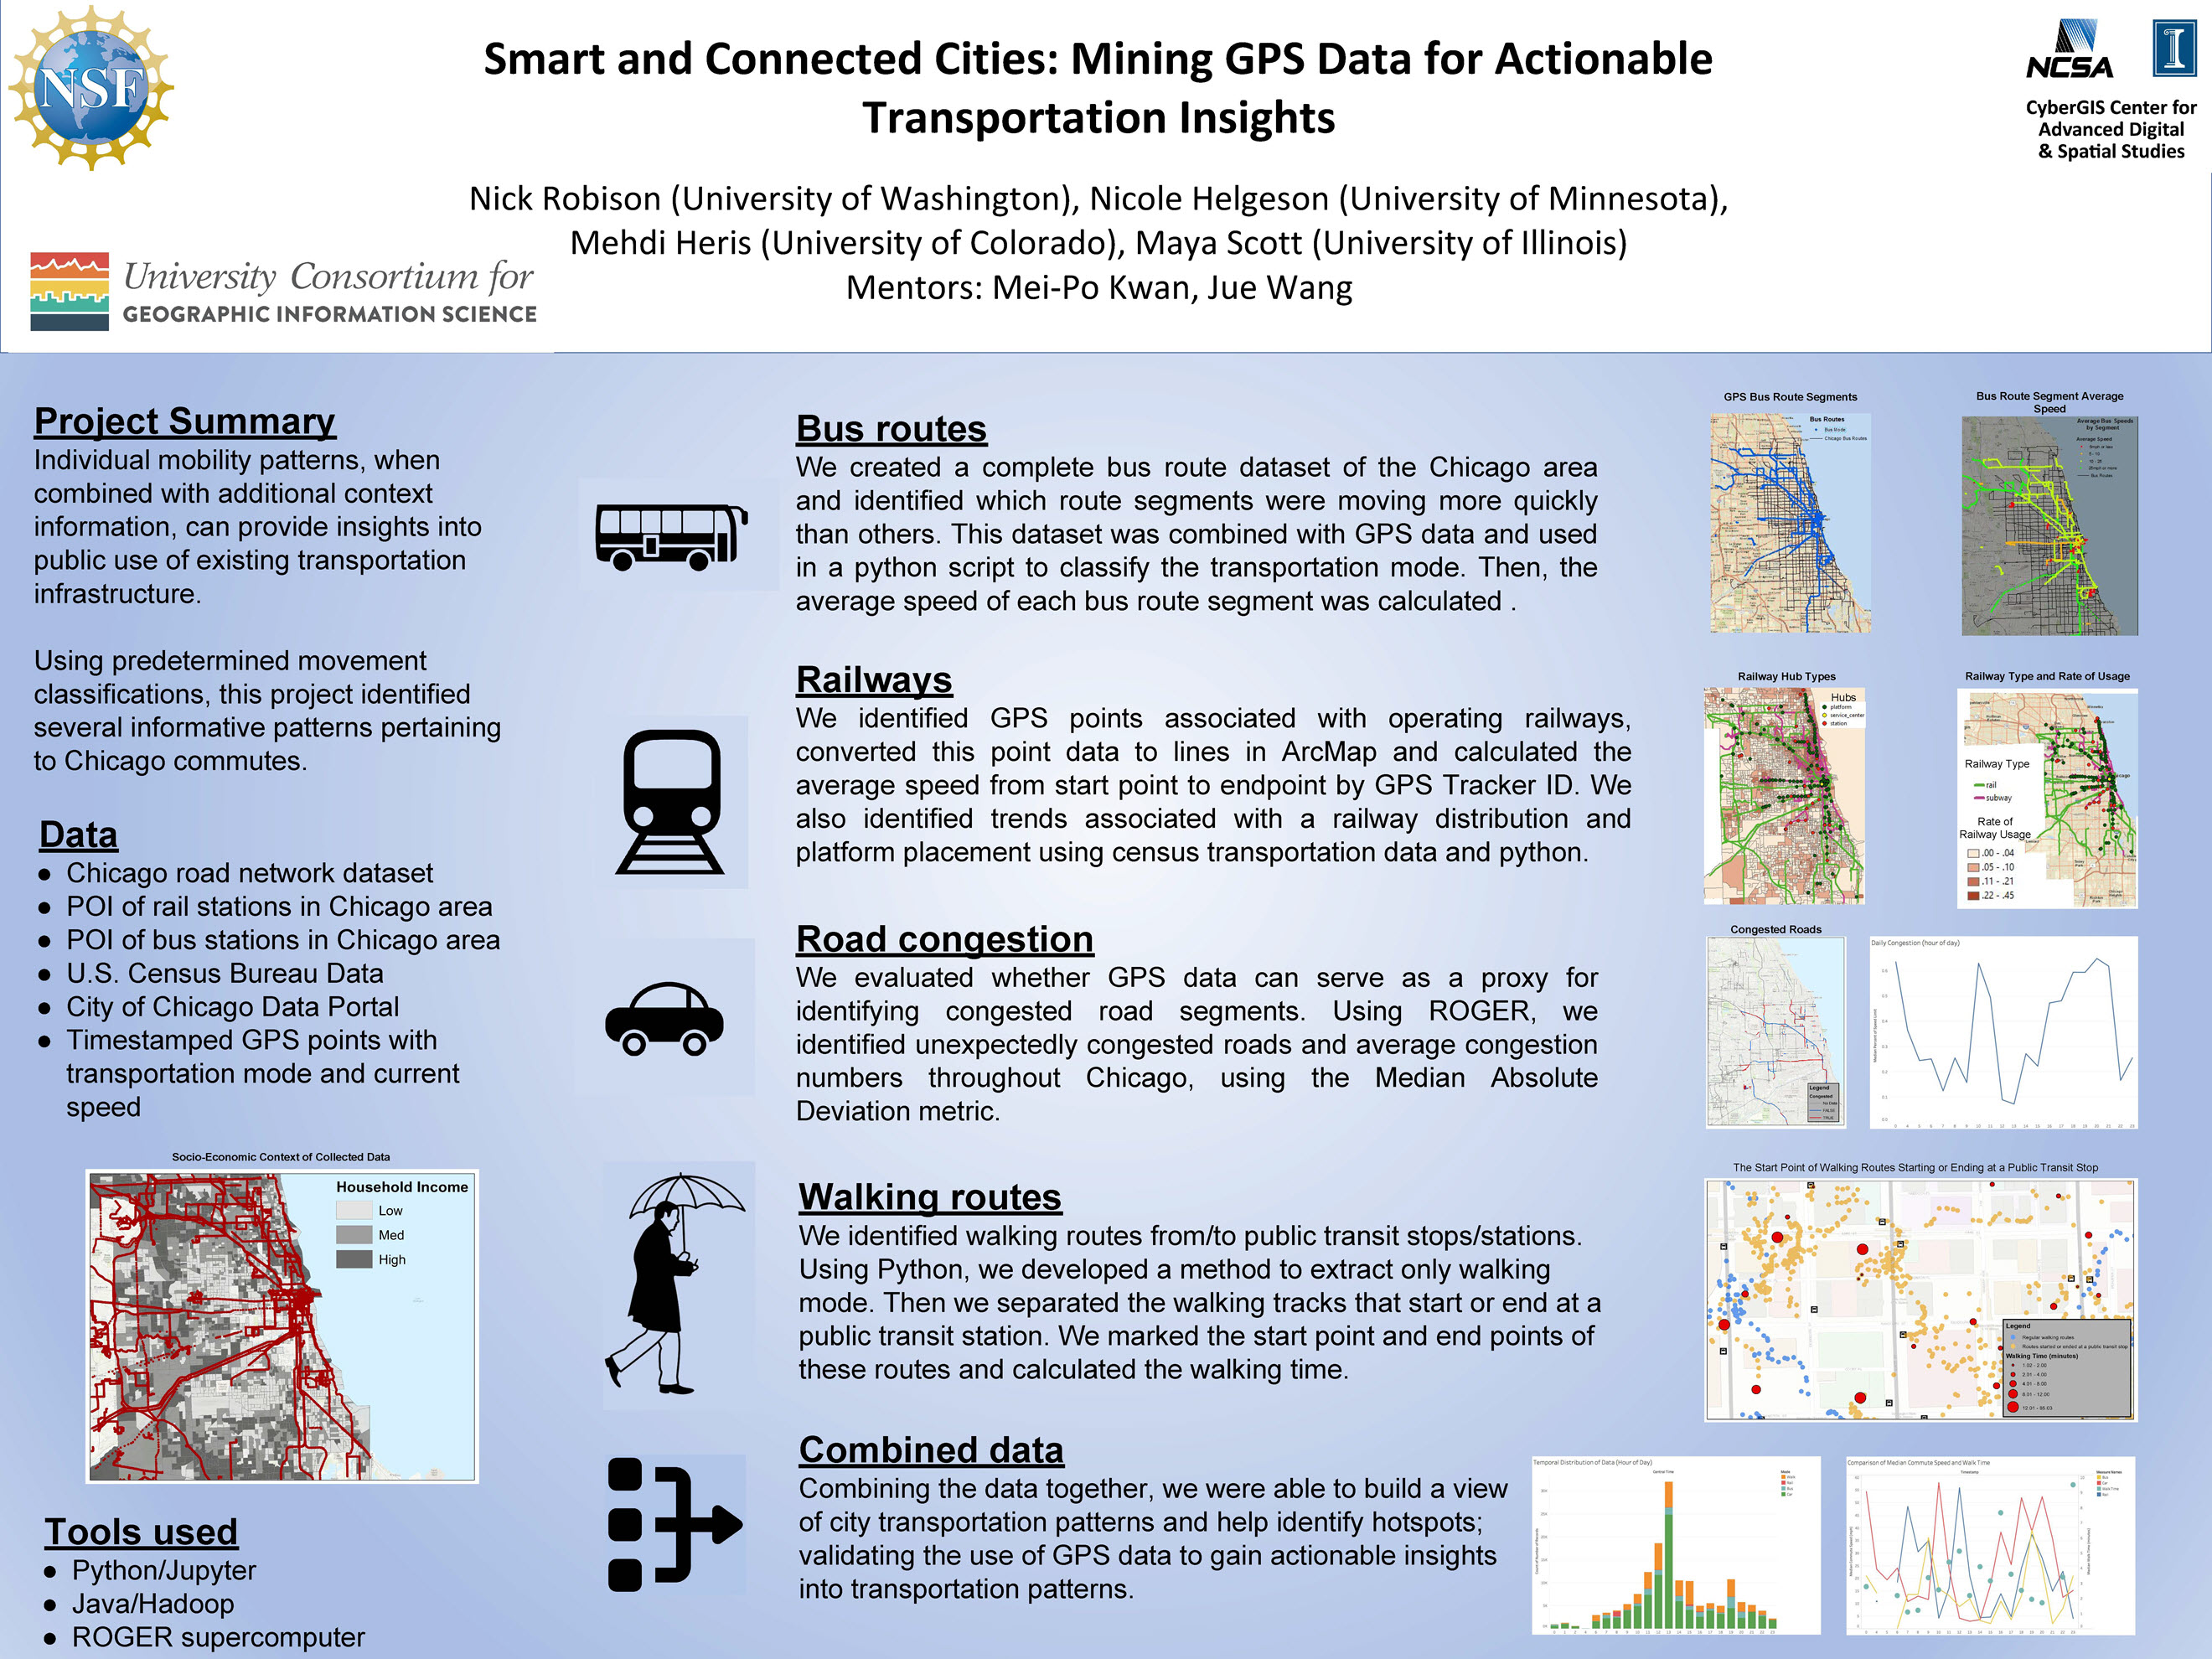 Smart and Connected Cities: Mining GPS Data for Actionable Transportation Insights